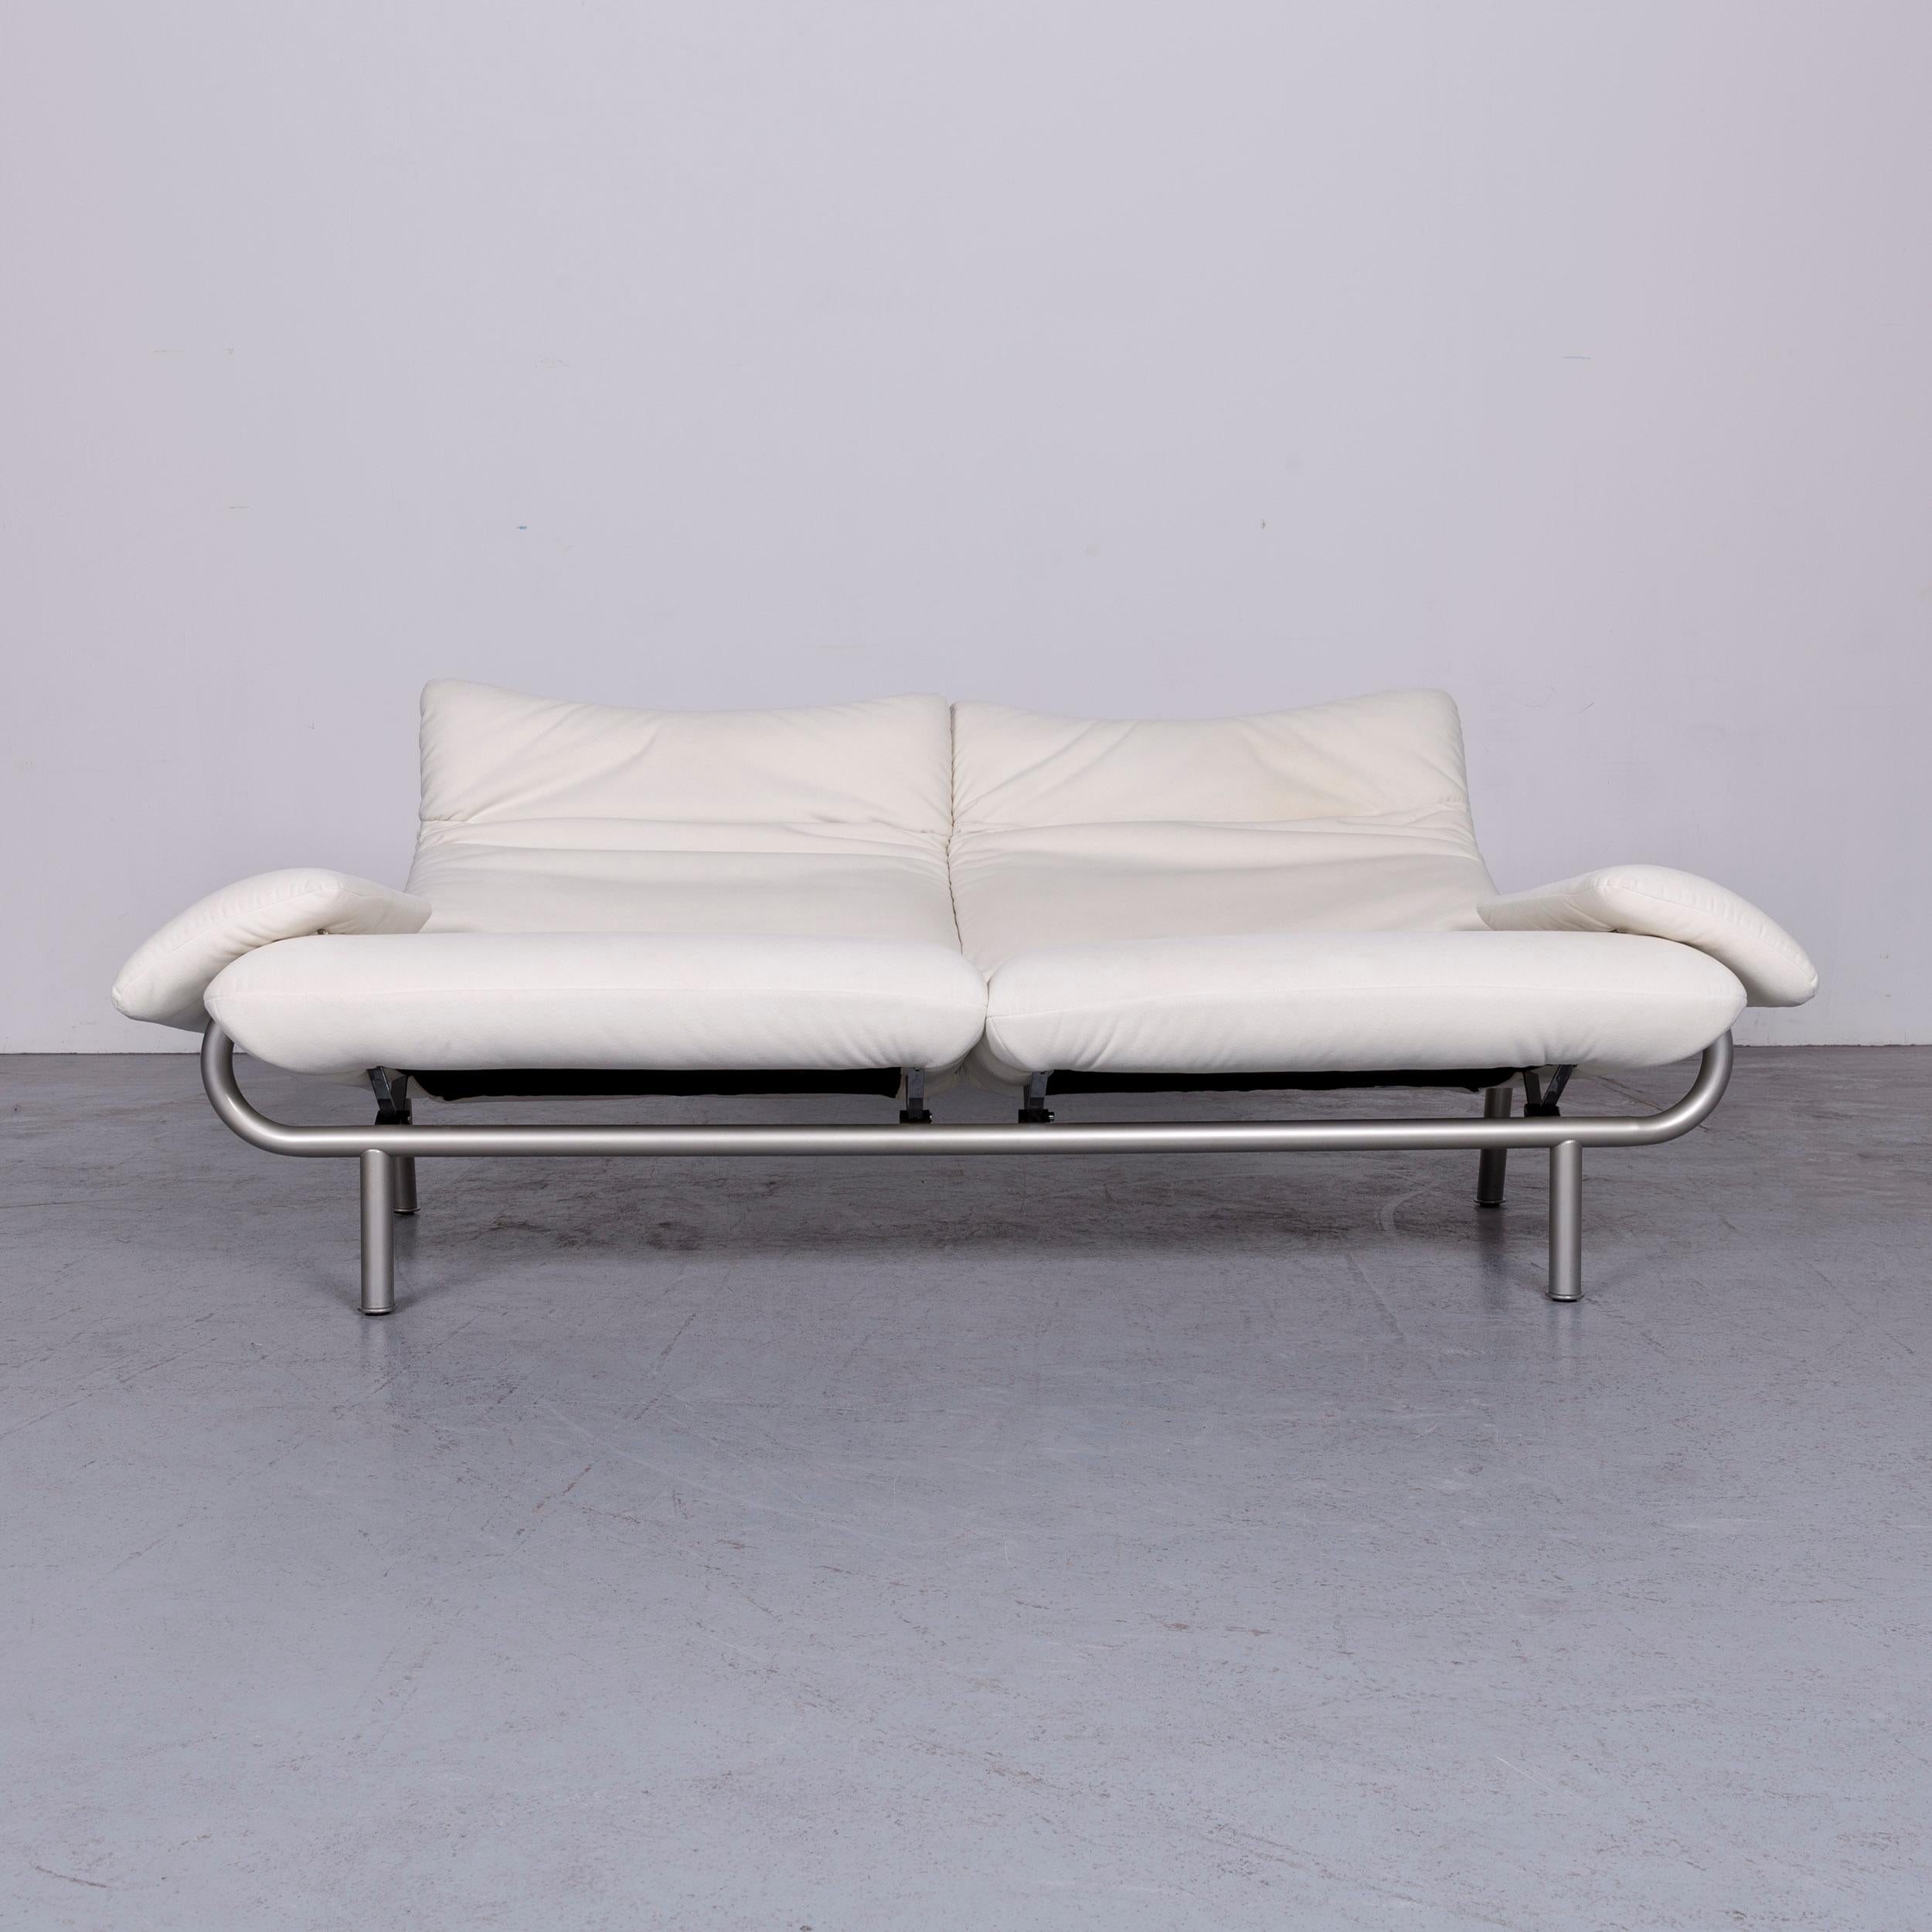 Laauser Designer Fabric Sofa Set White Three-Seat Two-Seat Couch In Good Condition For Sale In Cologne, DE